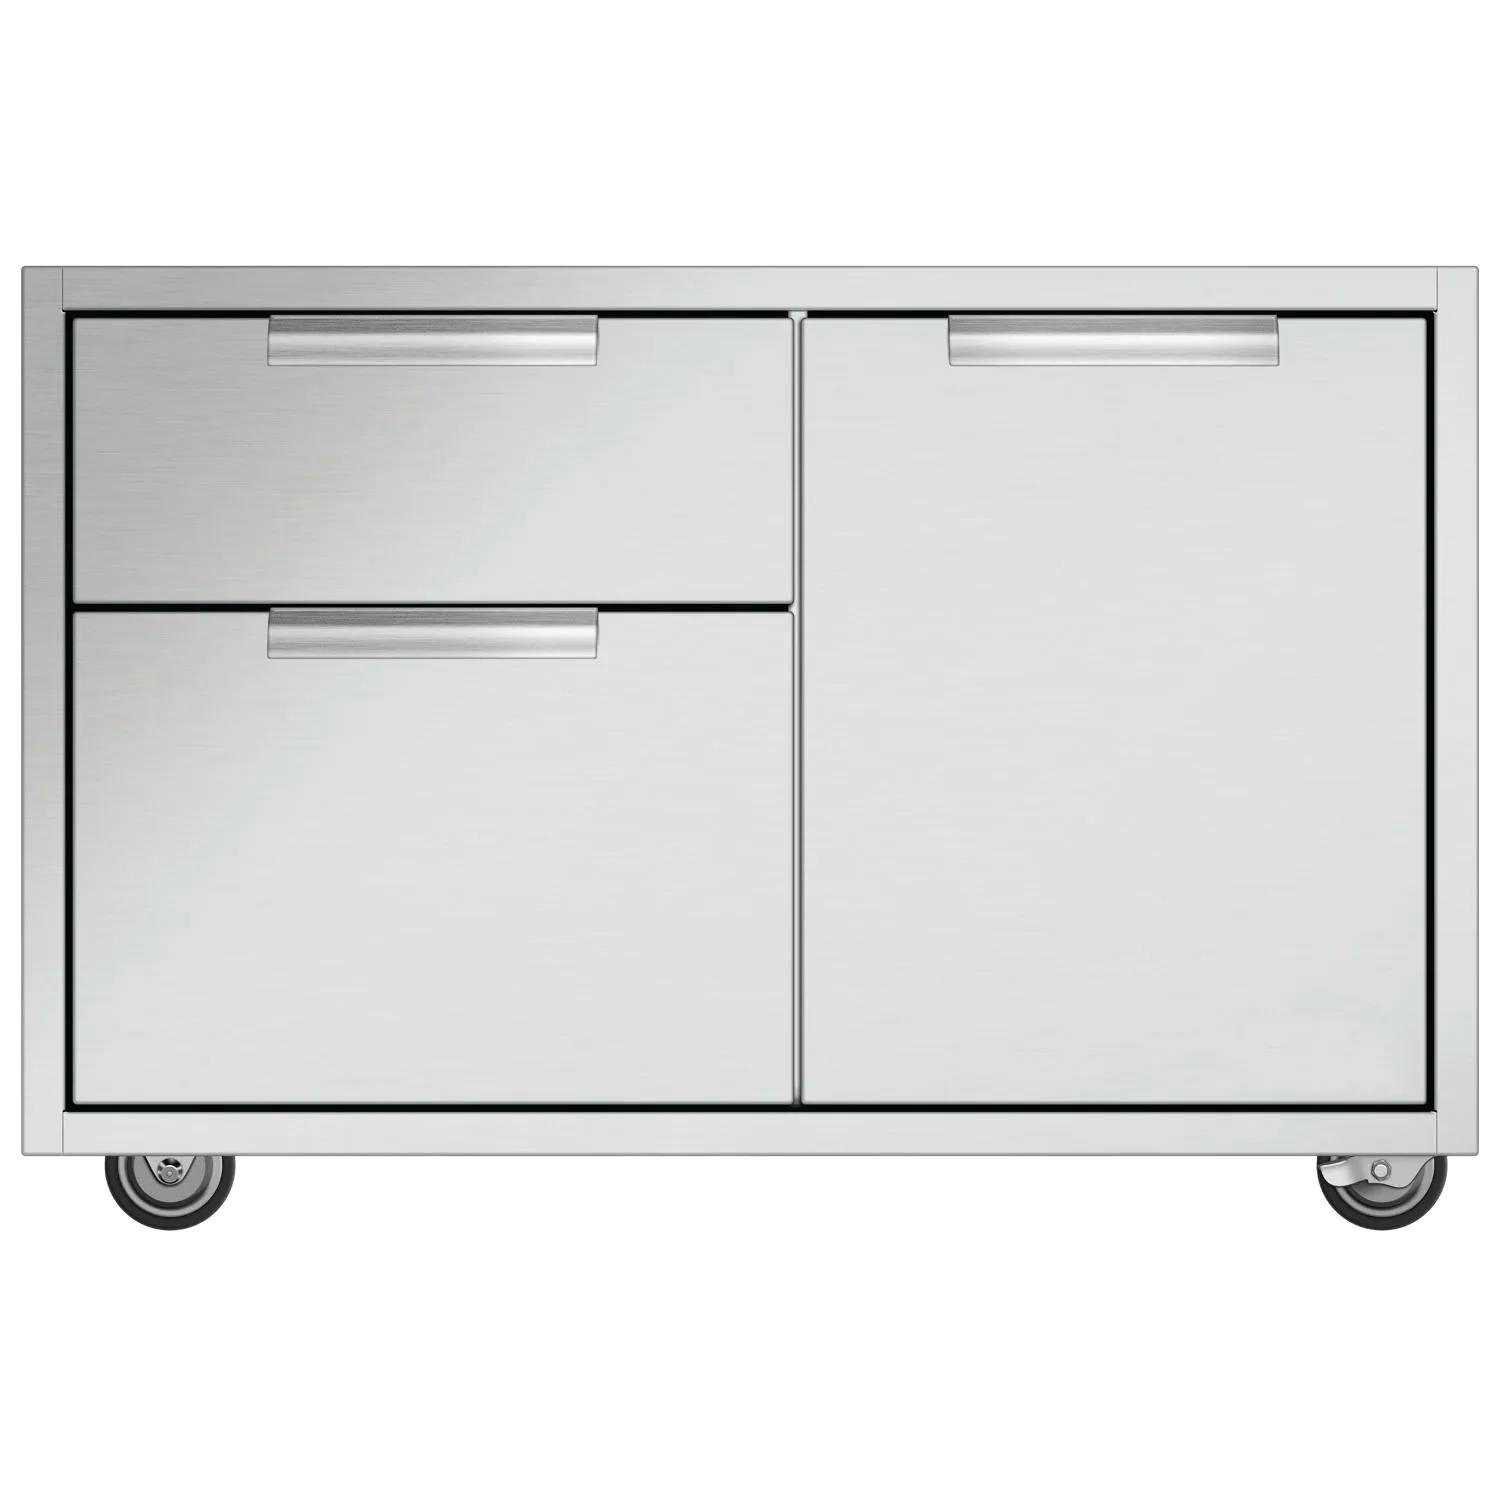 DCS Series 9 Evolution CAD Grill Cart (Side Shelf Kits Not Included)